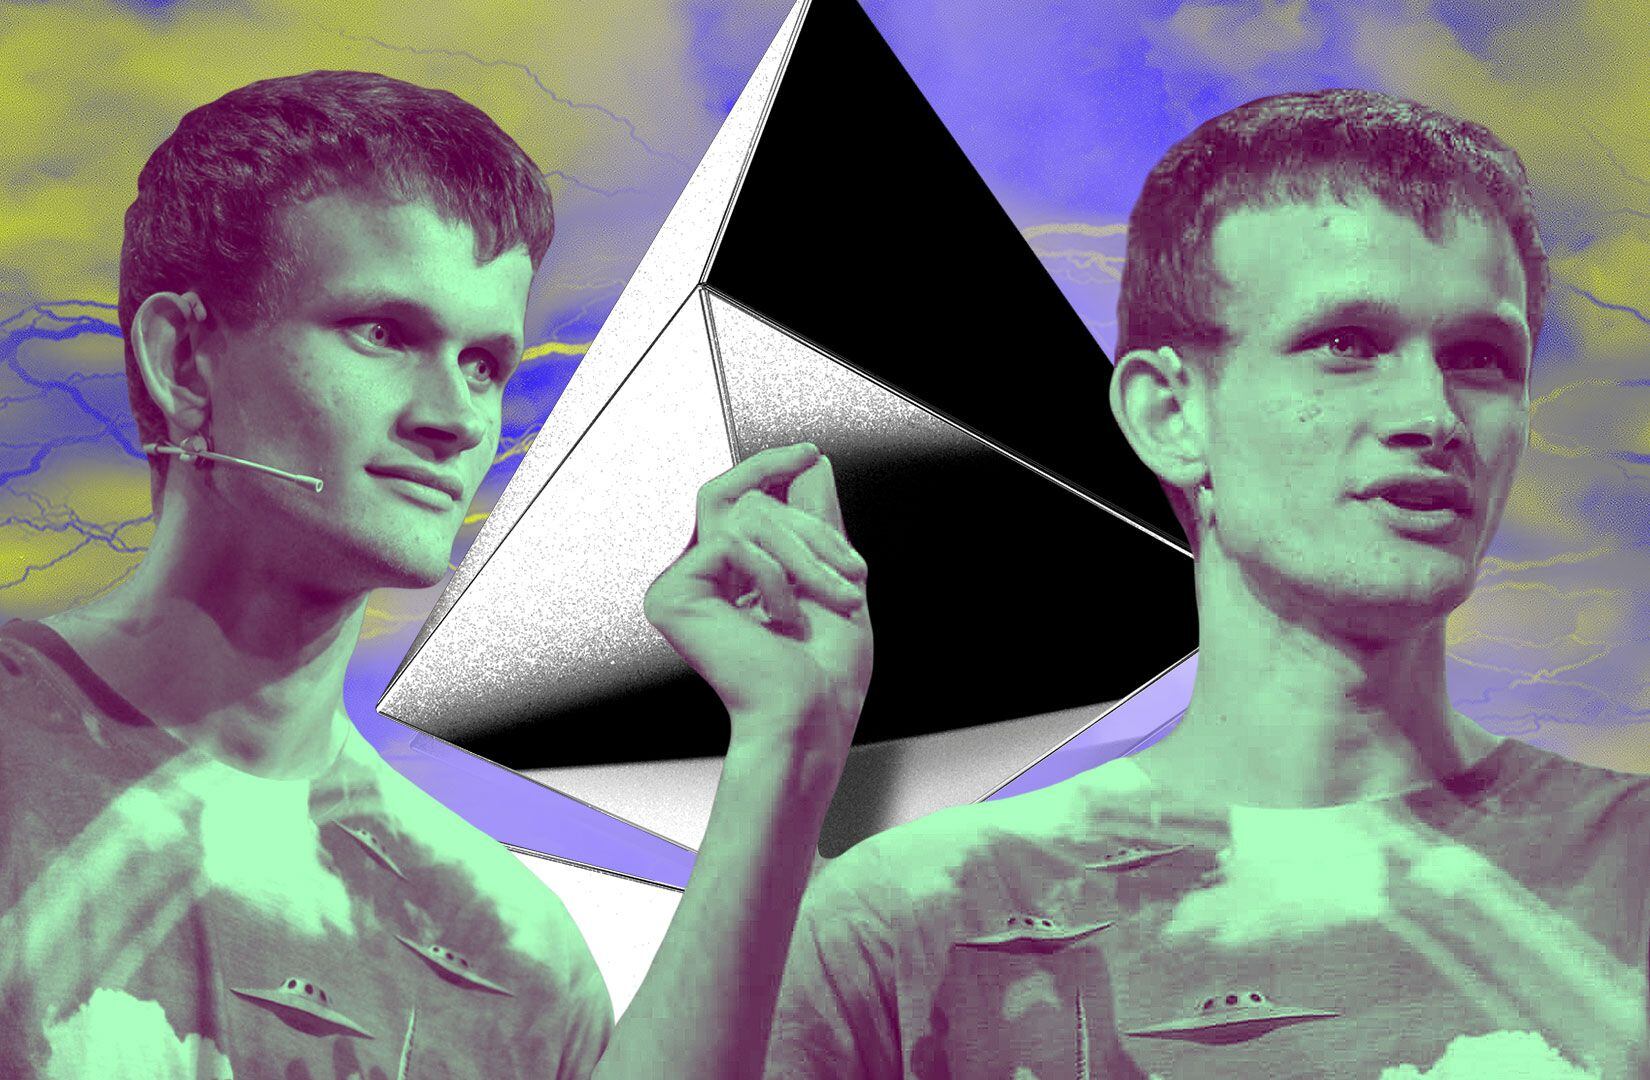 Vitalik Buterin has a new proposal to make Ethereum wallets easier to use — but obstacles remain